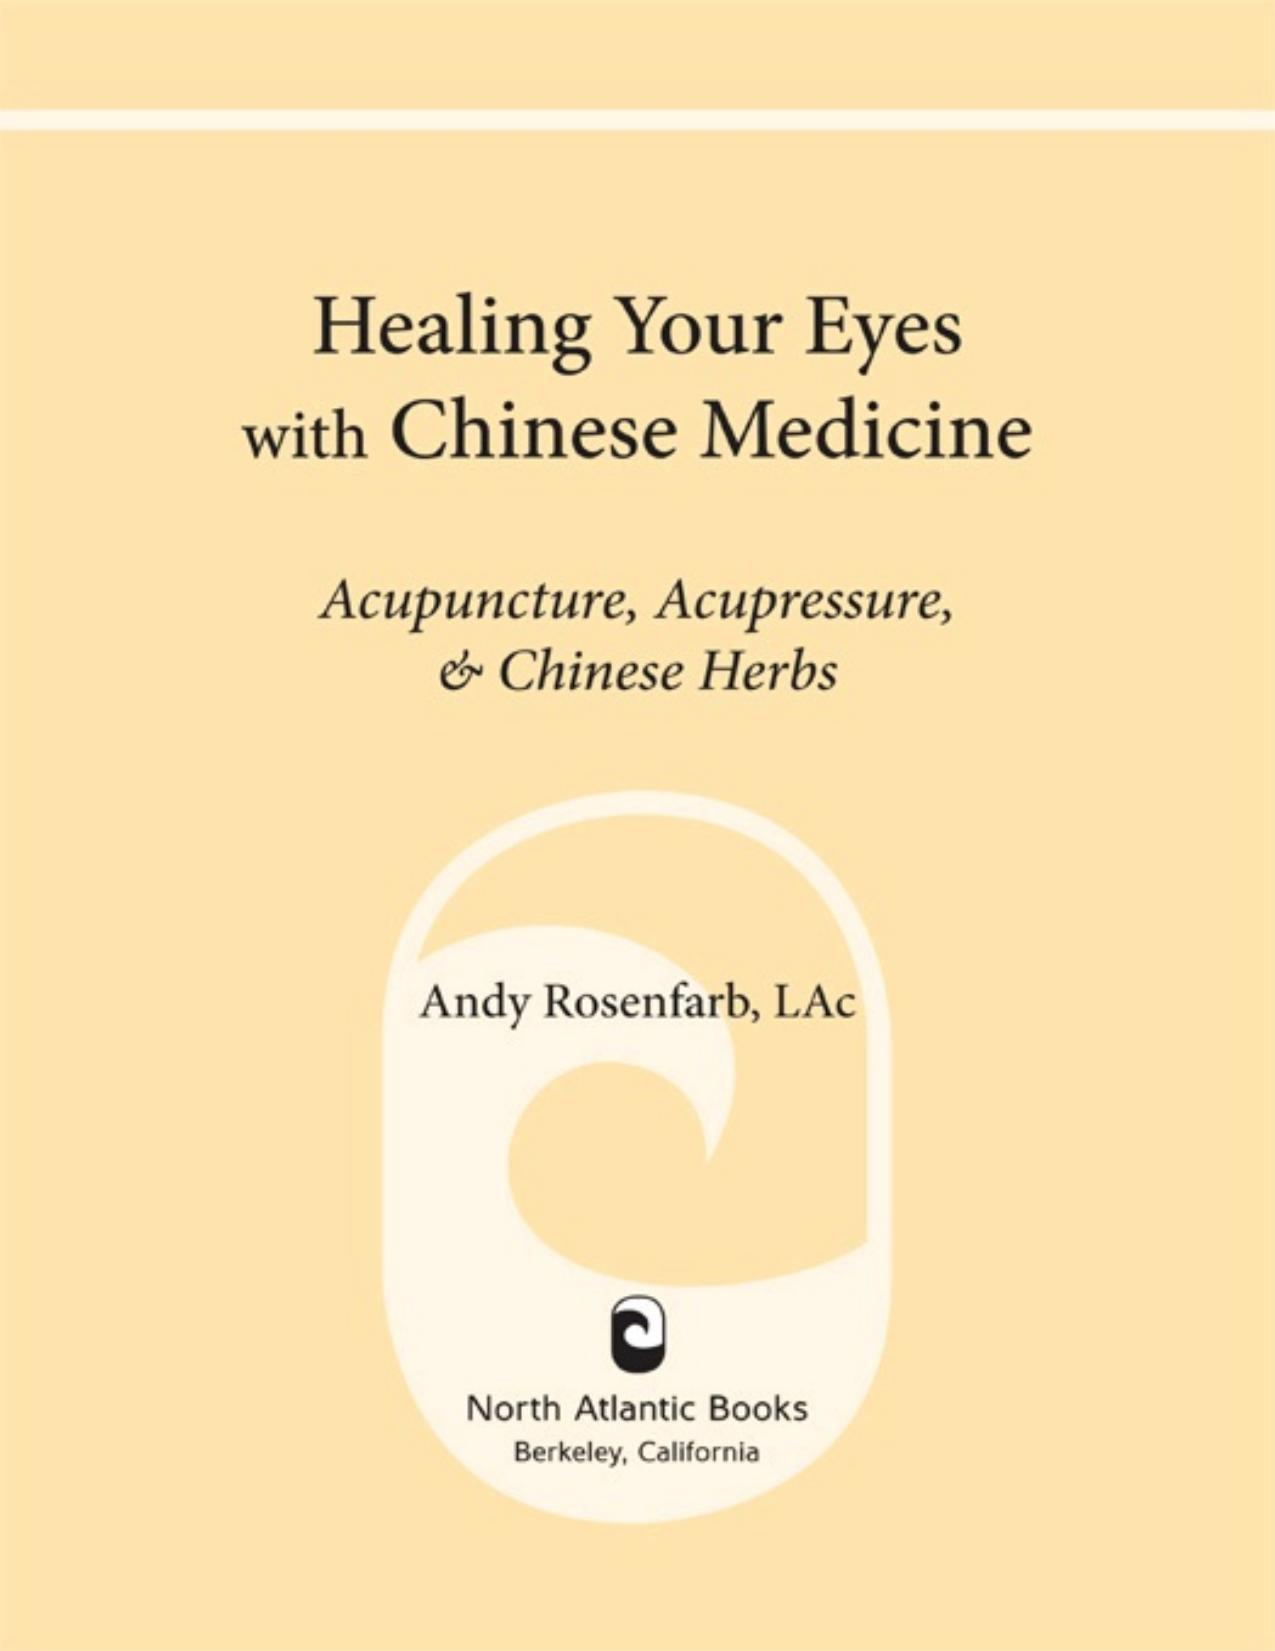 Healing Your Eyes with Chinese Medicine by Andy Rosenfarb